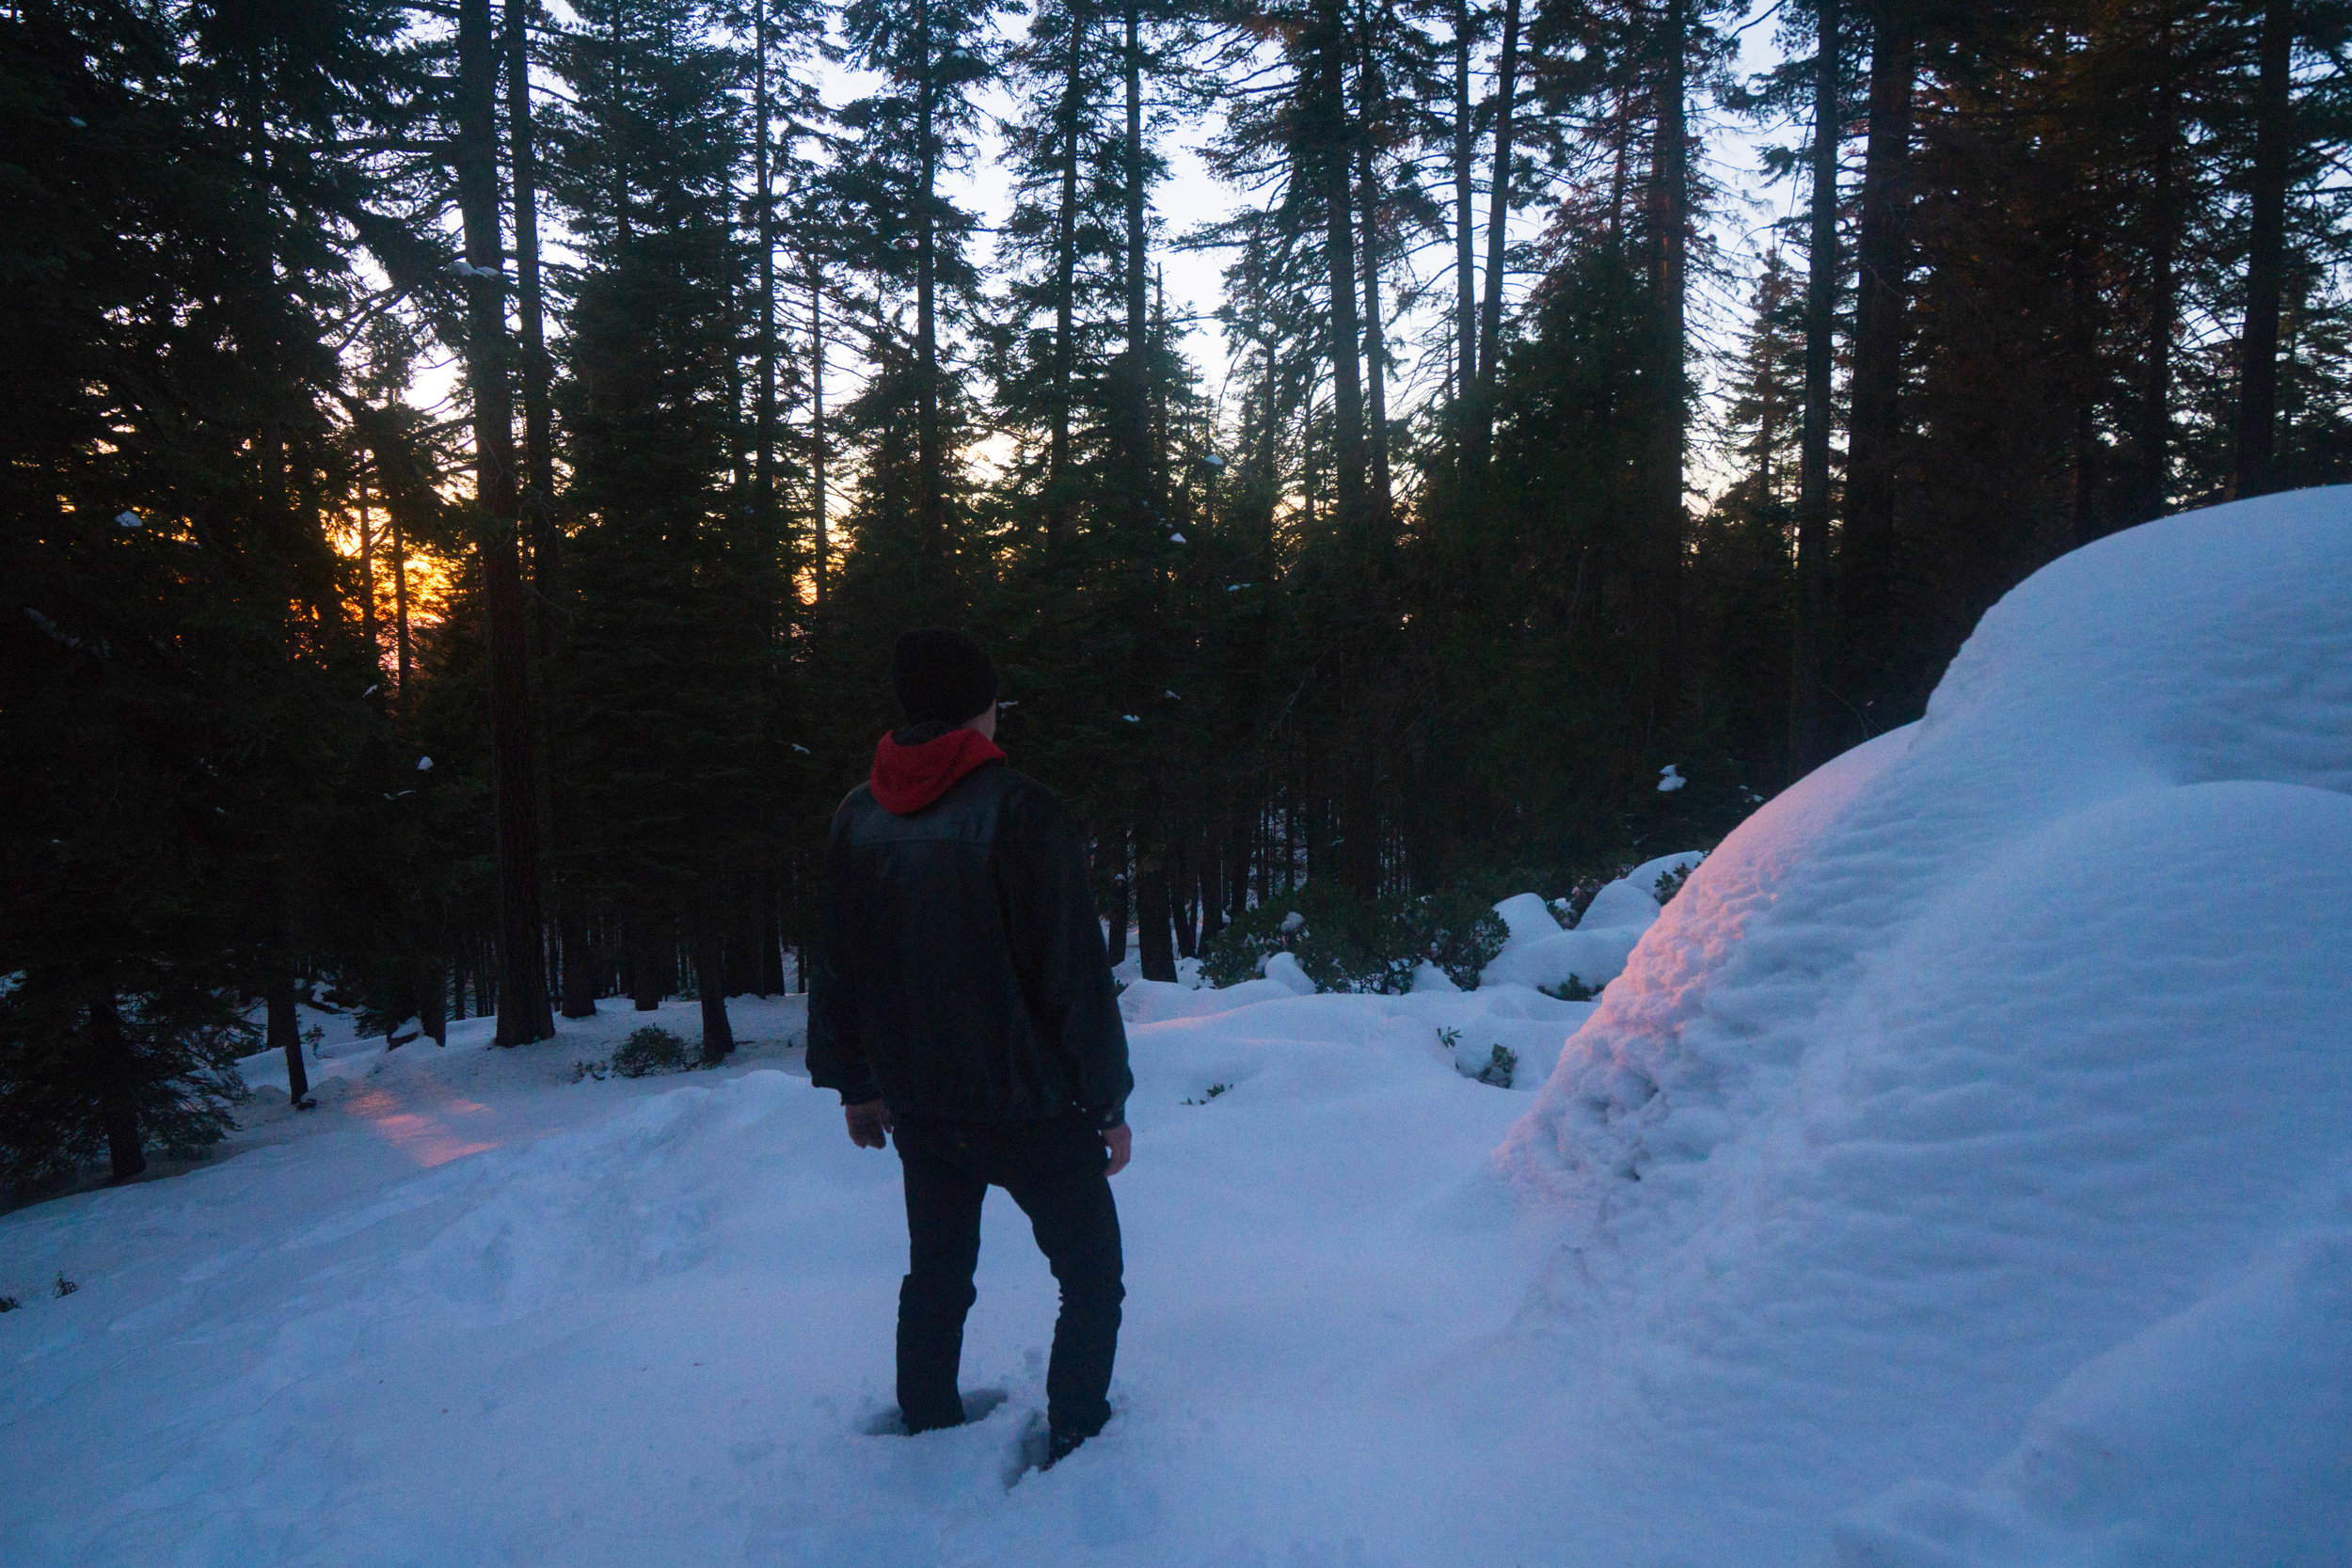 With camp now fully set up, we wander off to watch the last light diminish as the powdery snow glows a ruby red.